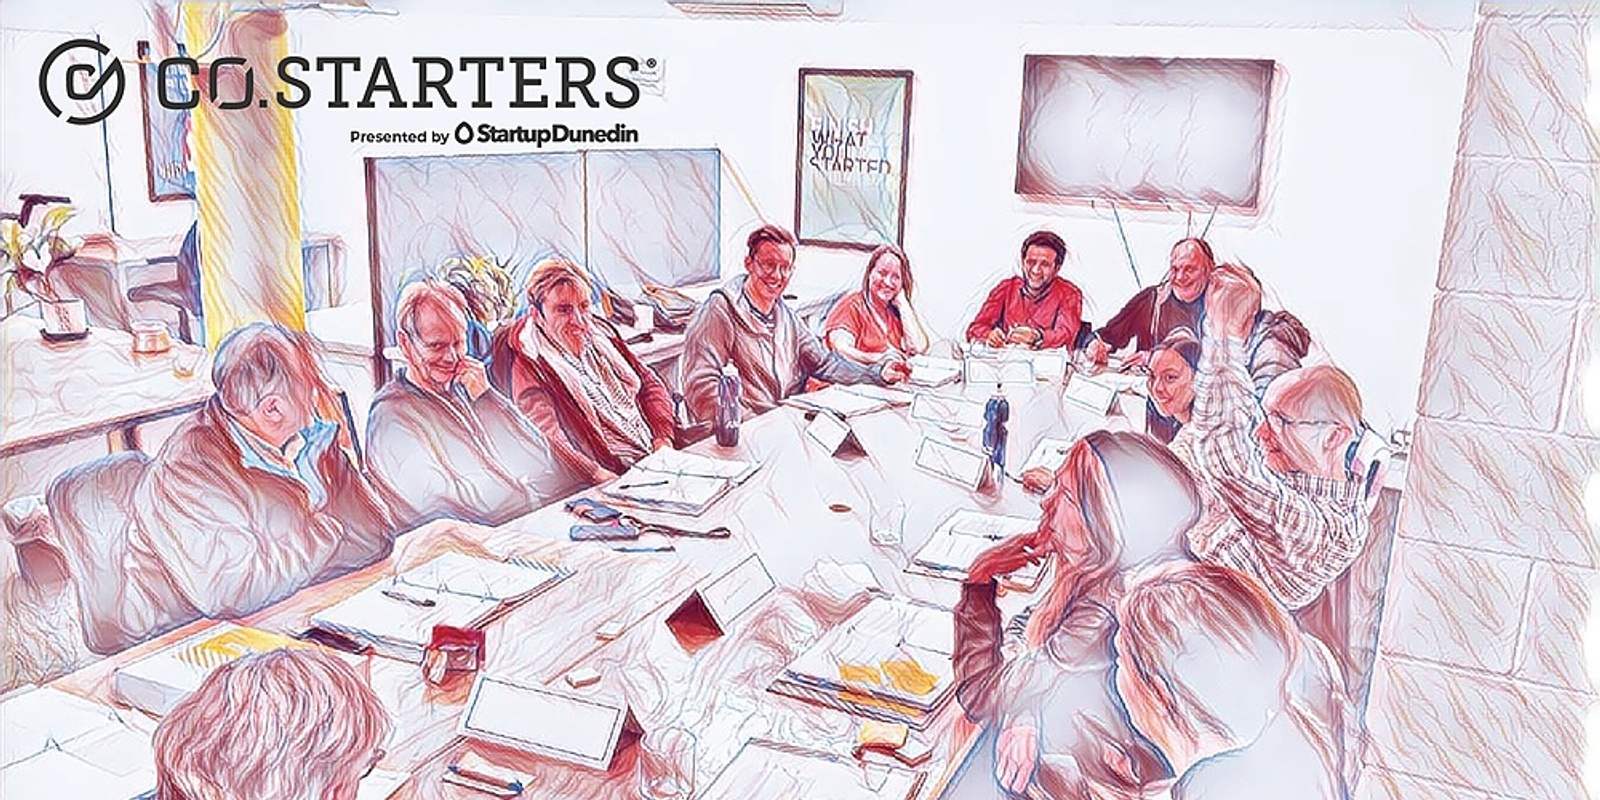 Banner image for Co.Starters 2019 - Dunedin Startup Business Course